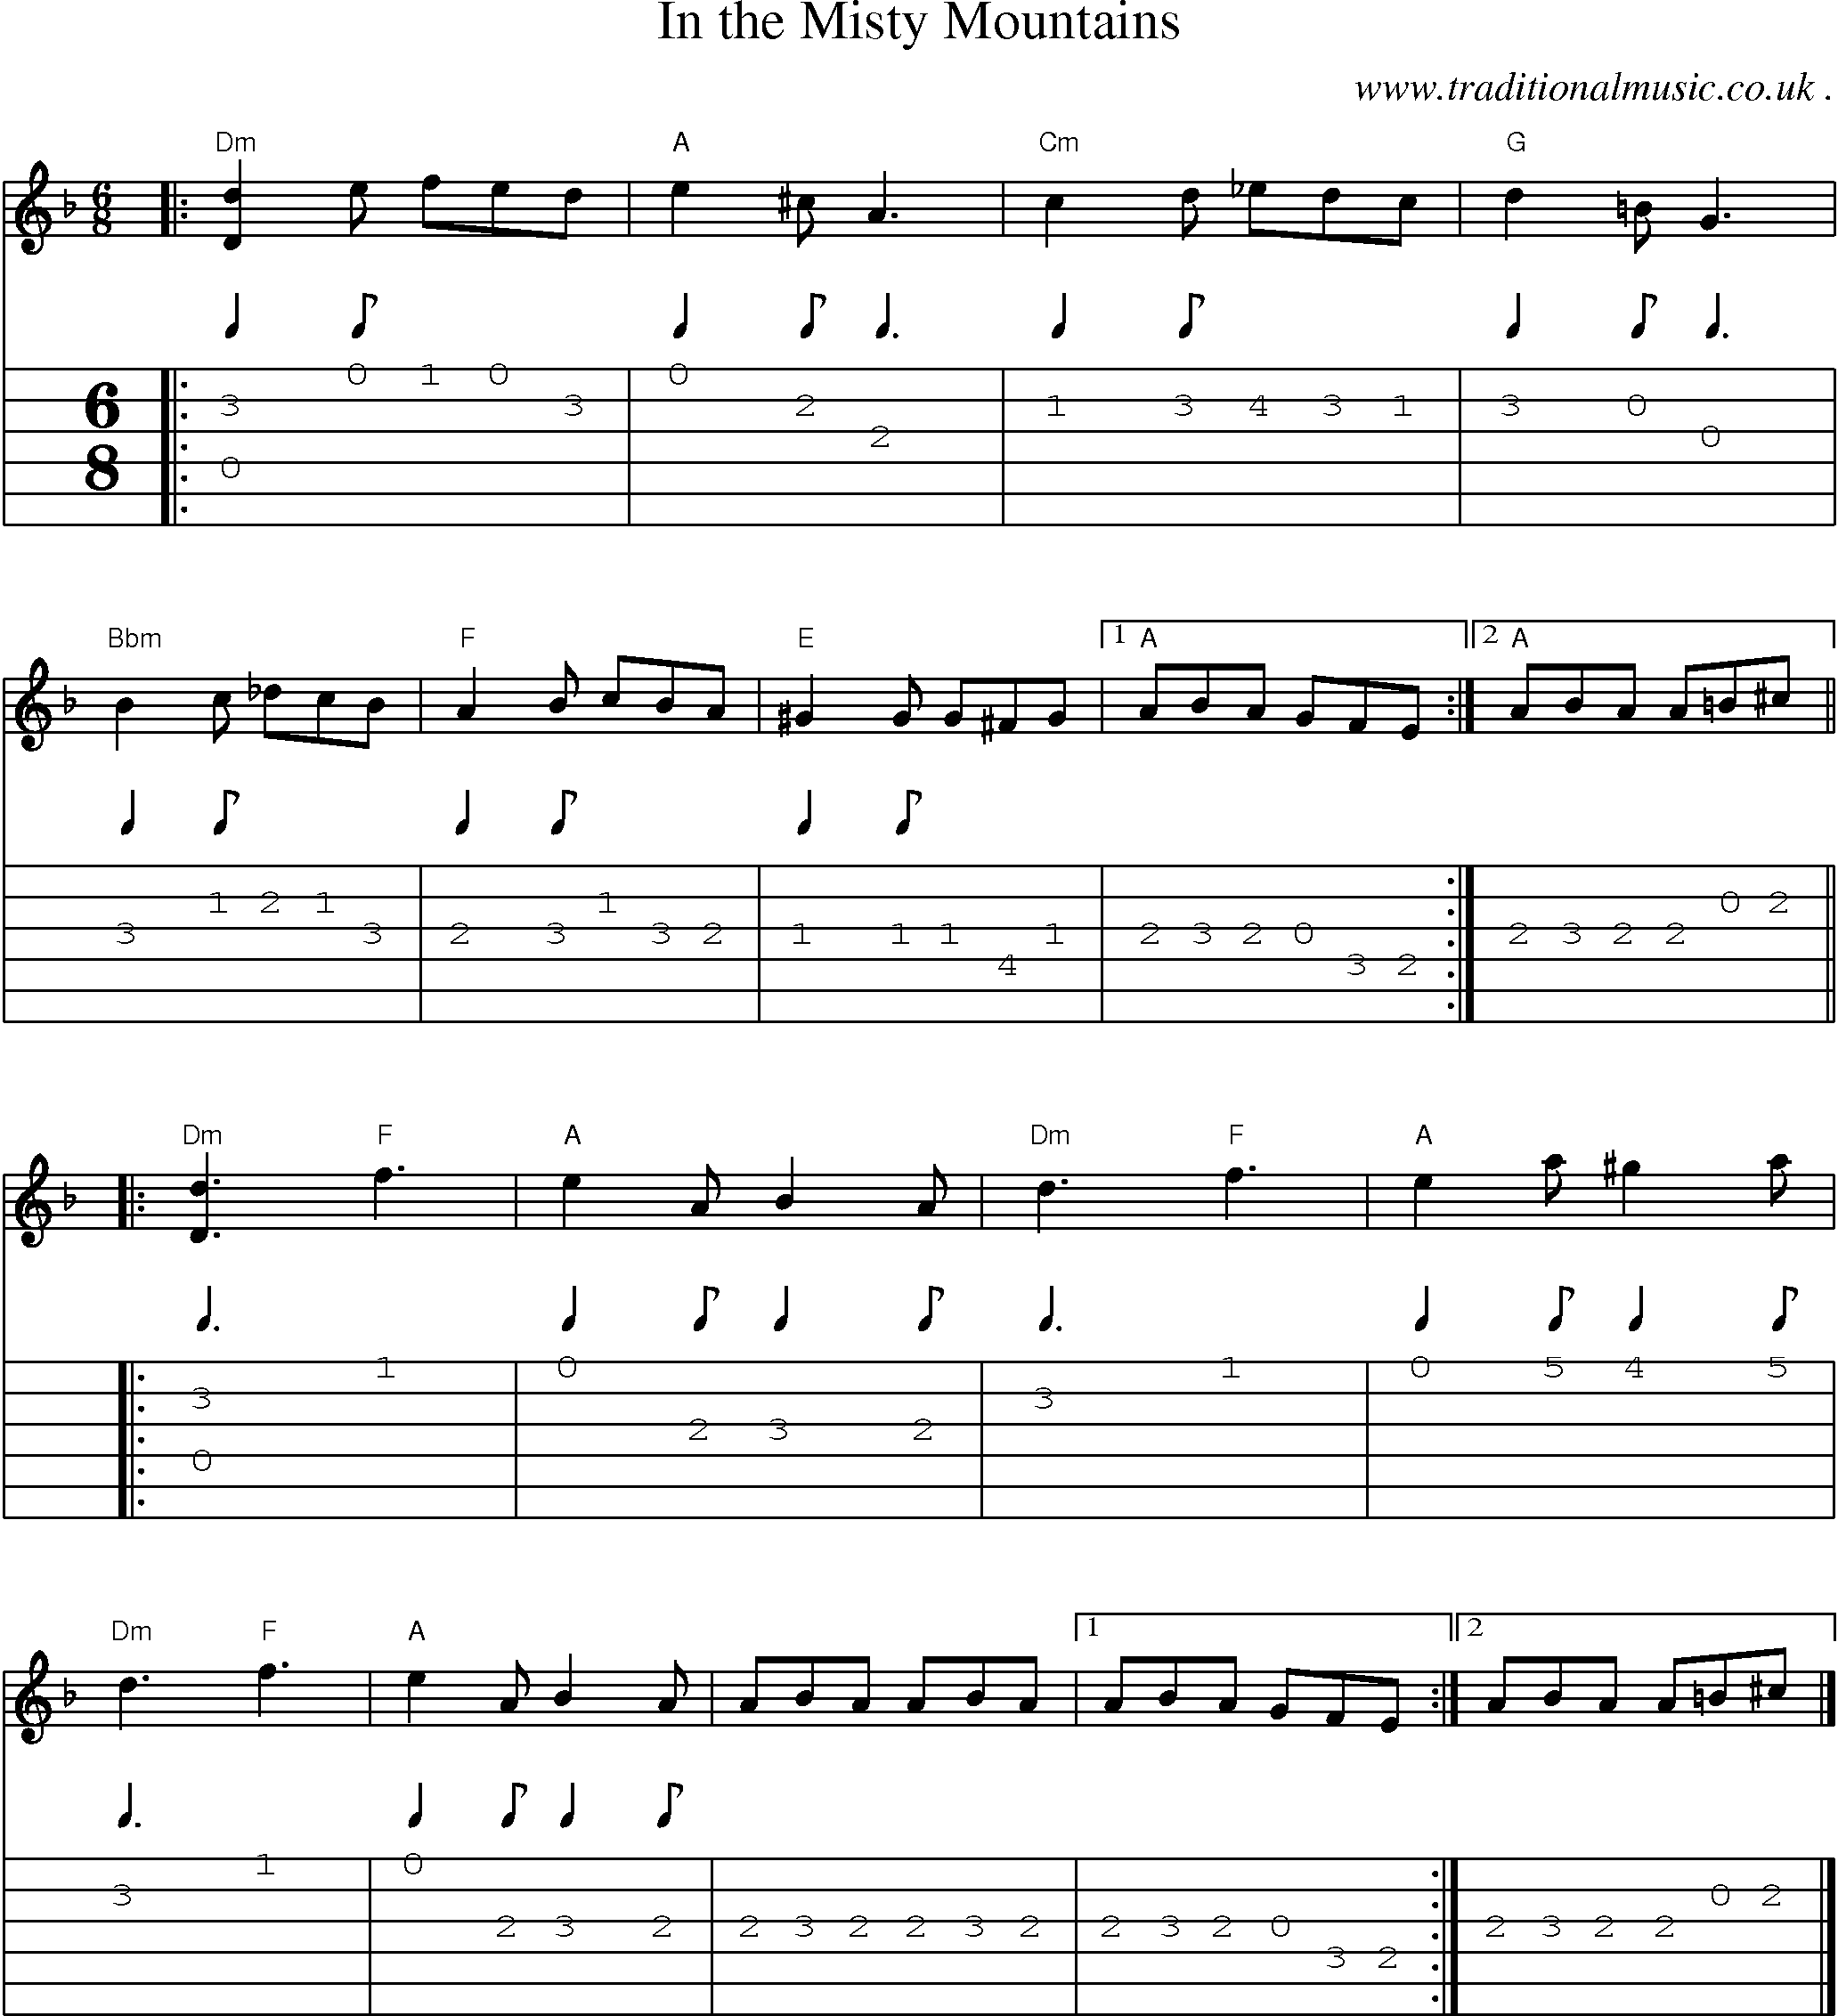 Music Score and Guitar Tabs for In The Misty Mountains